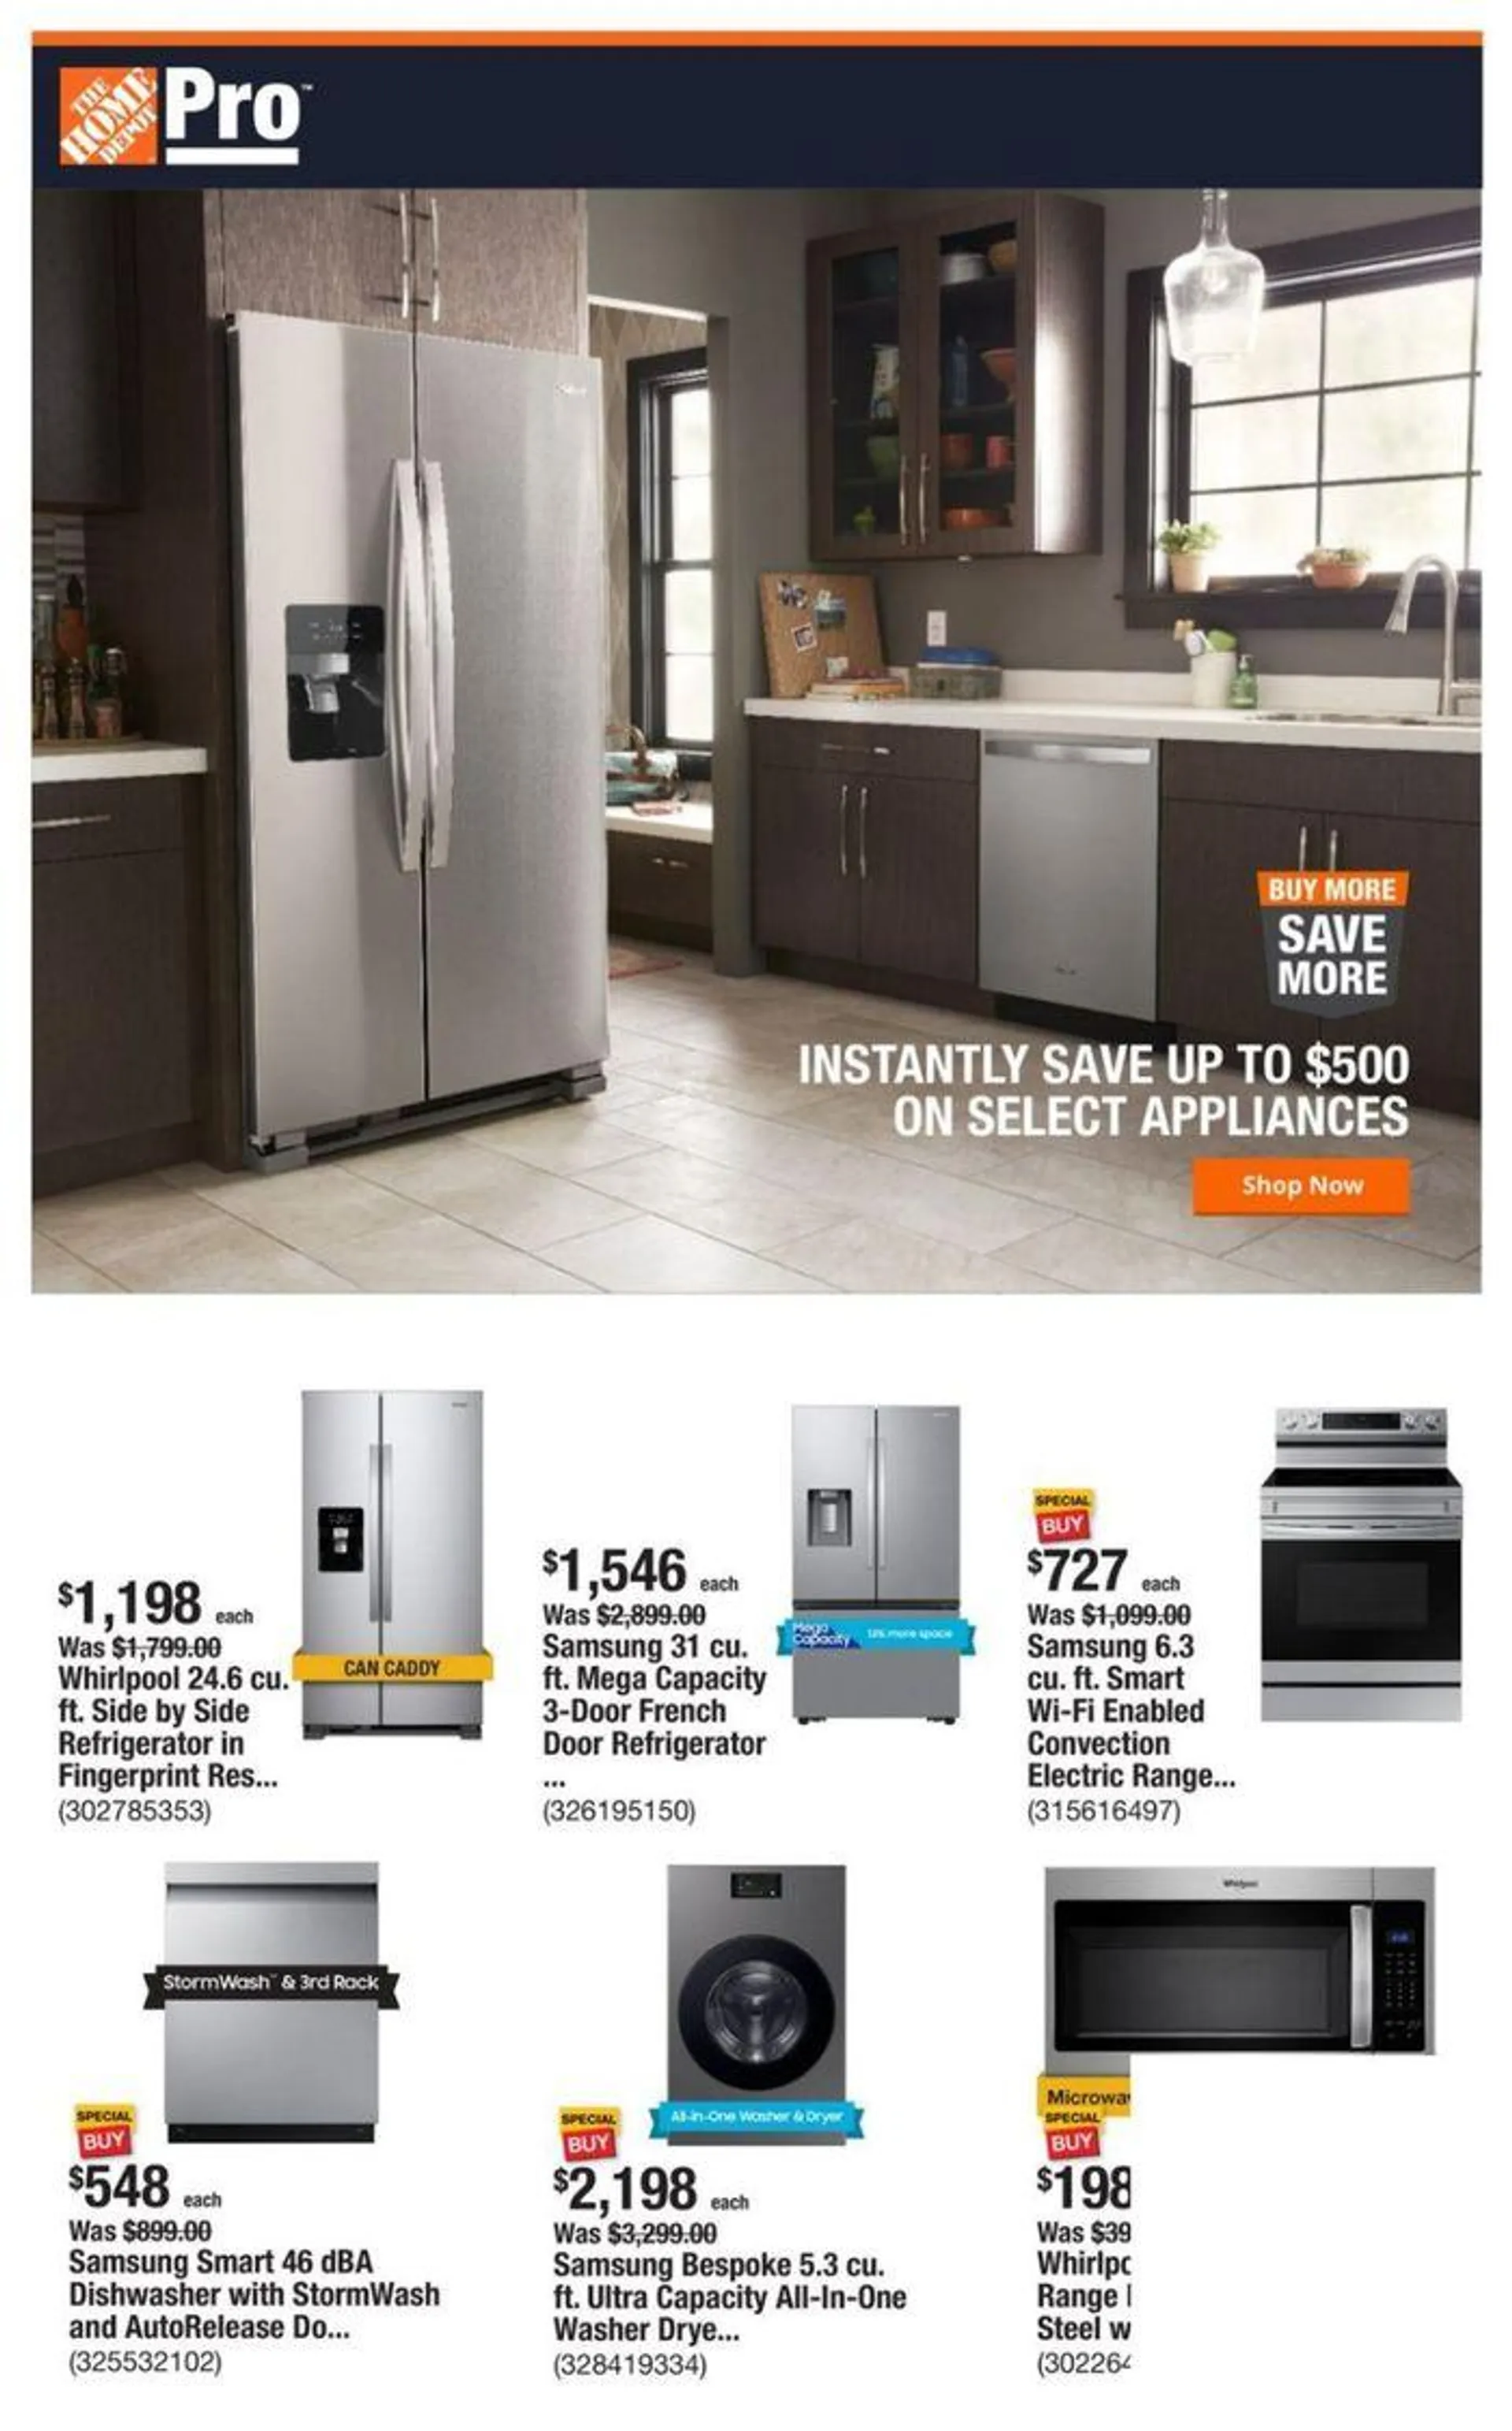 Instantly Save Up On Select Appliances - 1